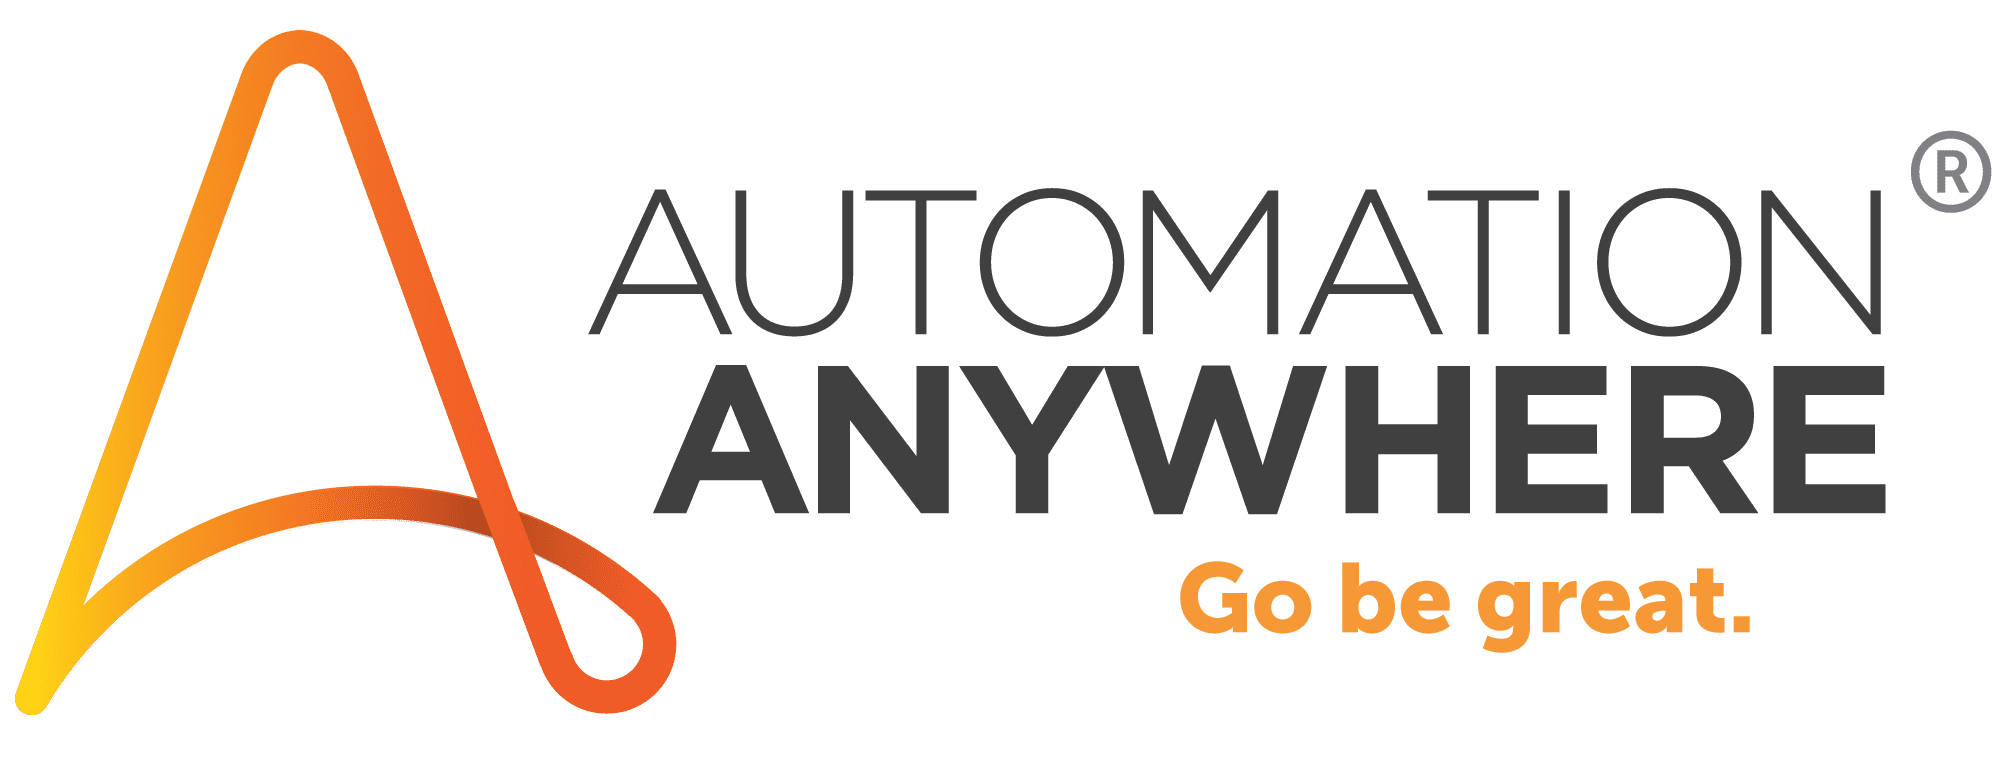 Automation Anywhere RPA Partner